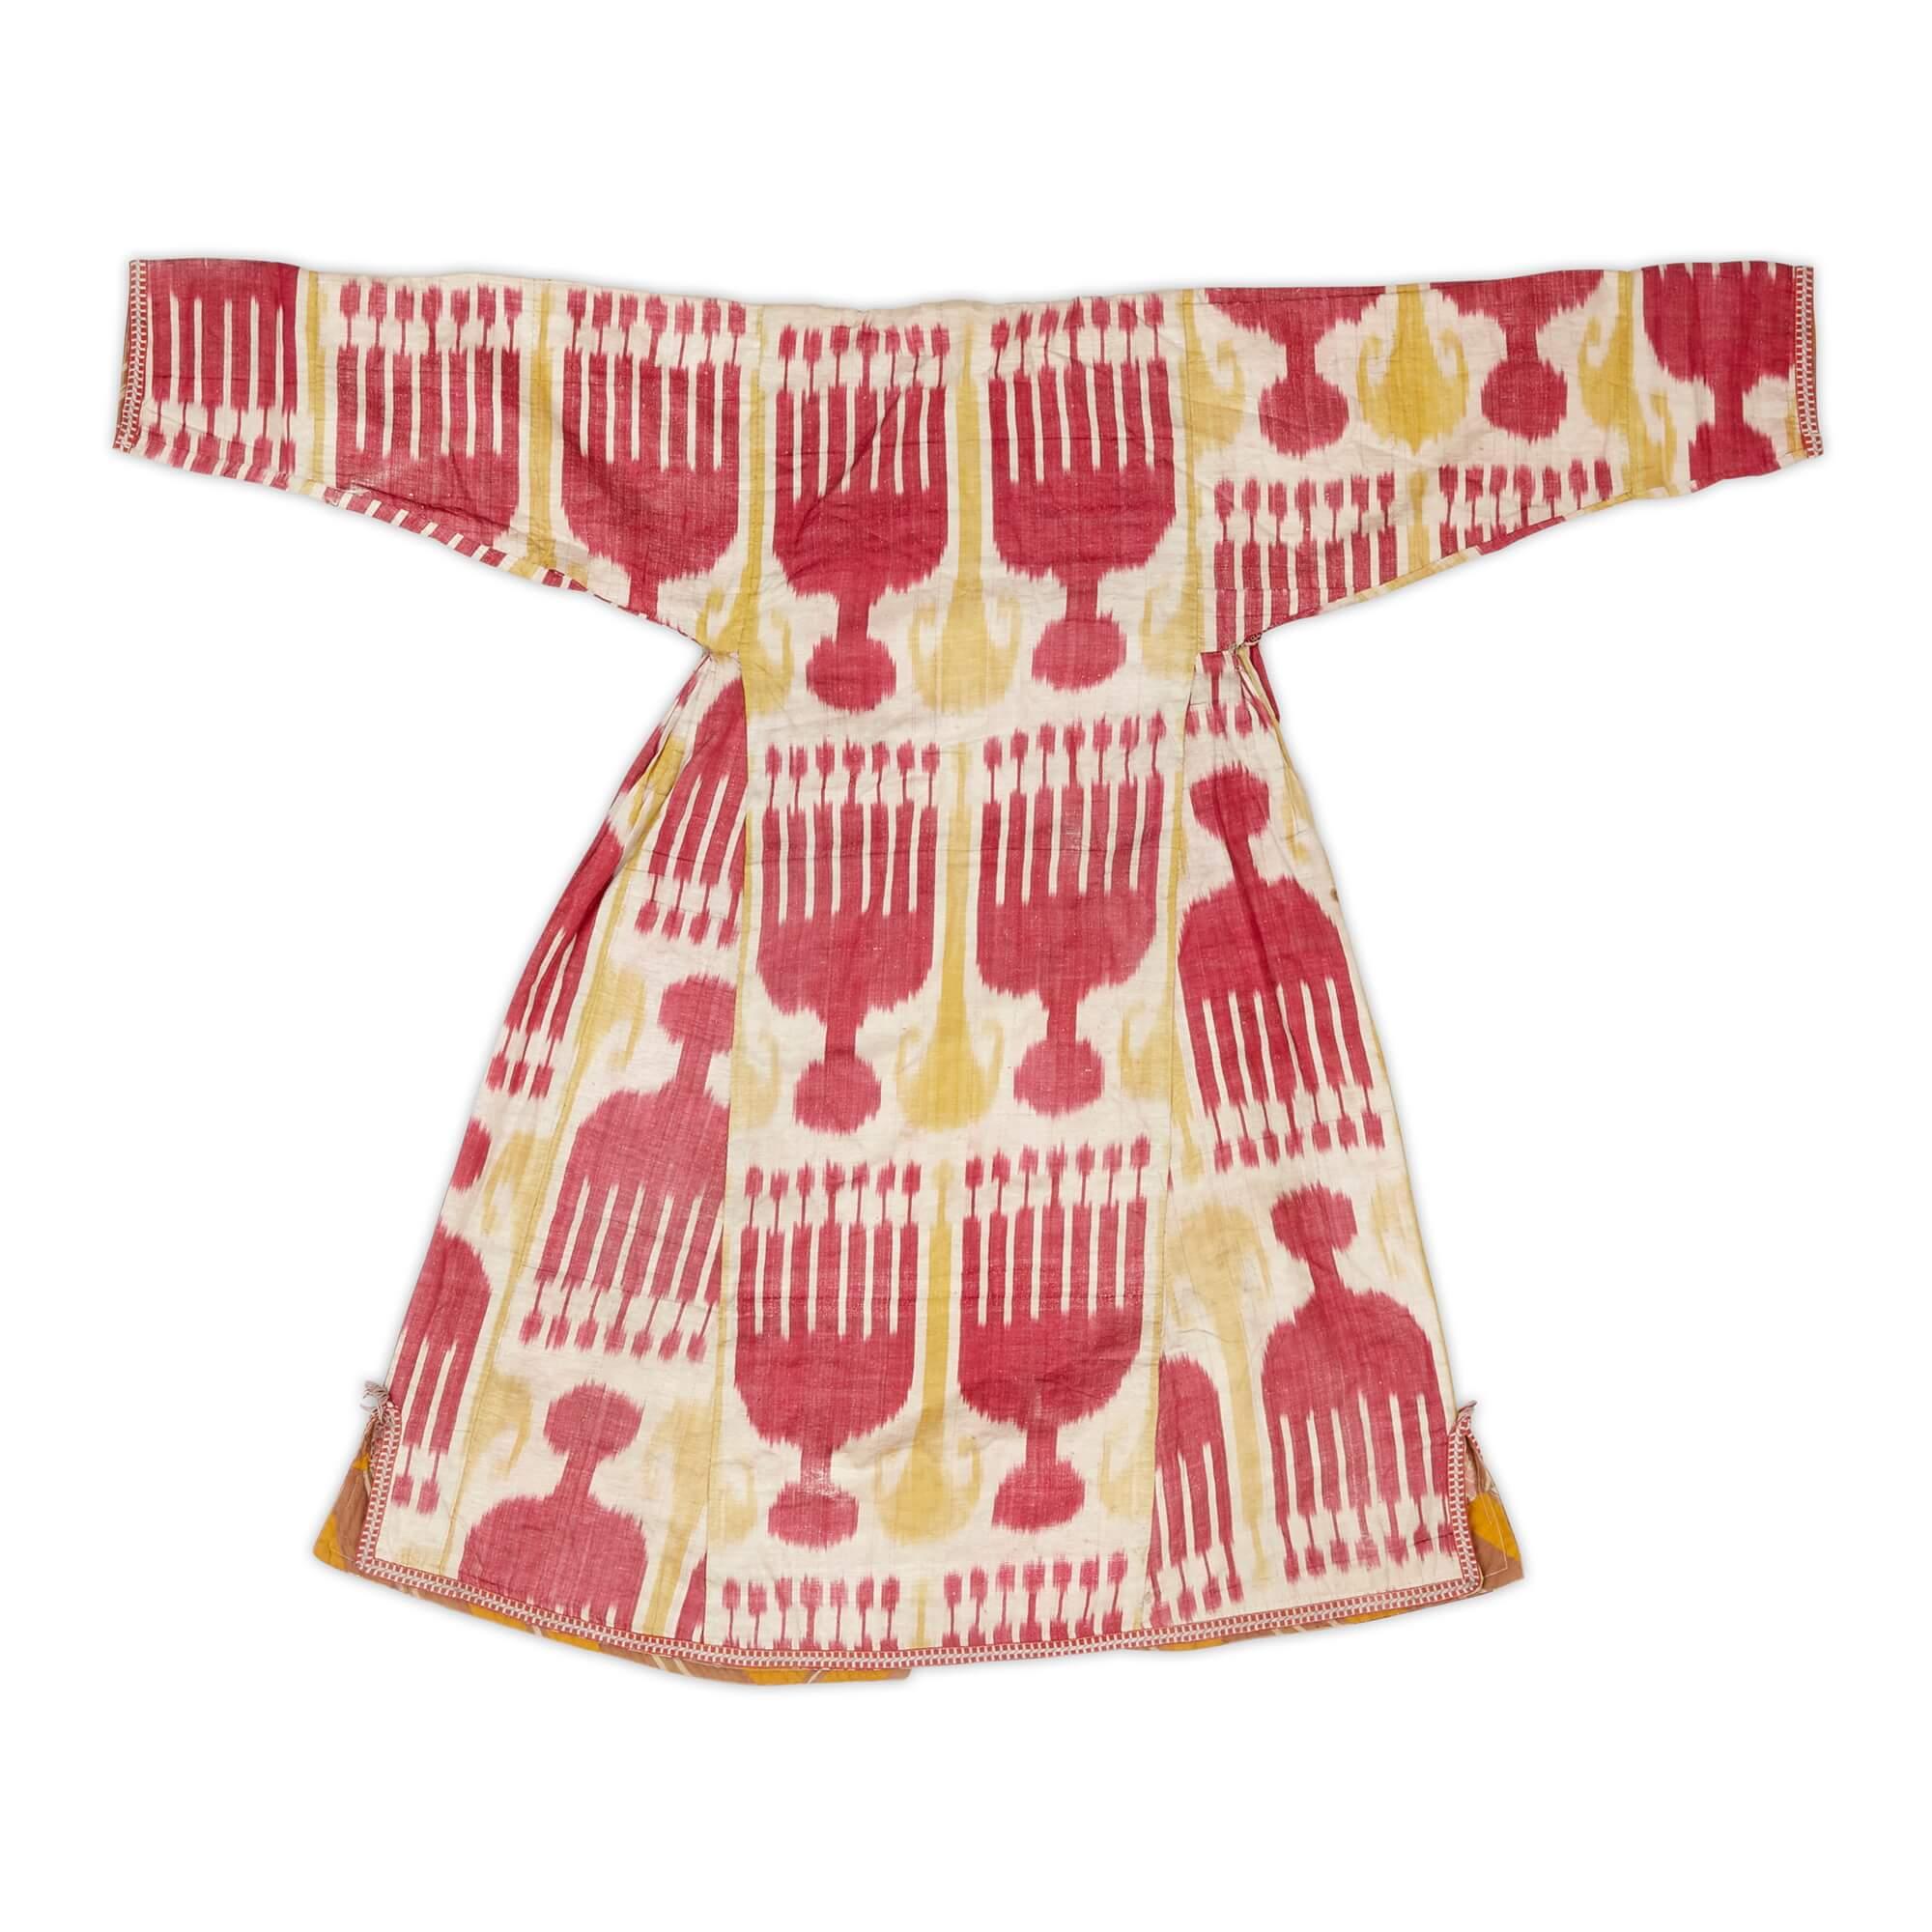 20th century Uzbek cotton and silk ikat chapan robe
Uzbekistan, 20th Century 
Height 122cm, width 153cm

Historically, an ikat chapan robe was a status symbol worn by nomadic tribes and settles in Uzbekistan as well as other Central Asian